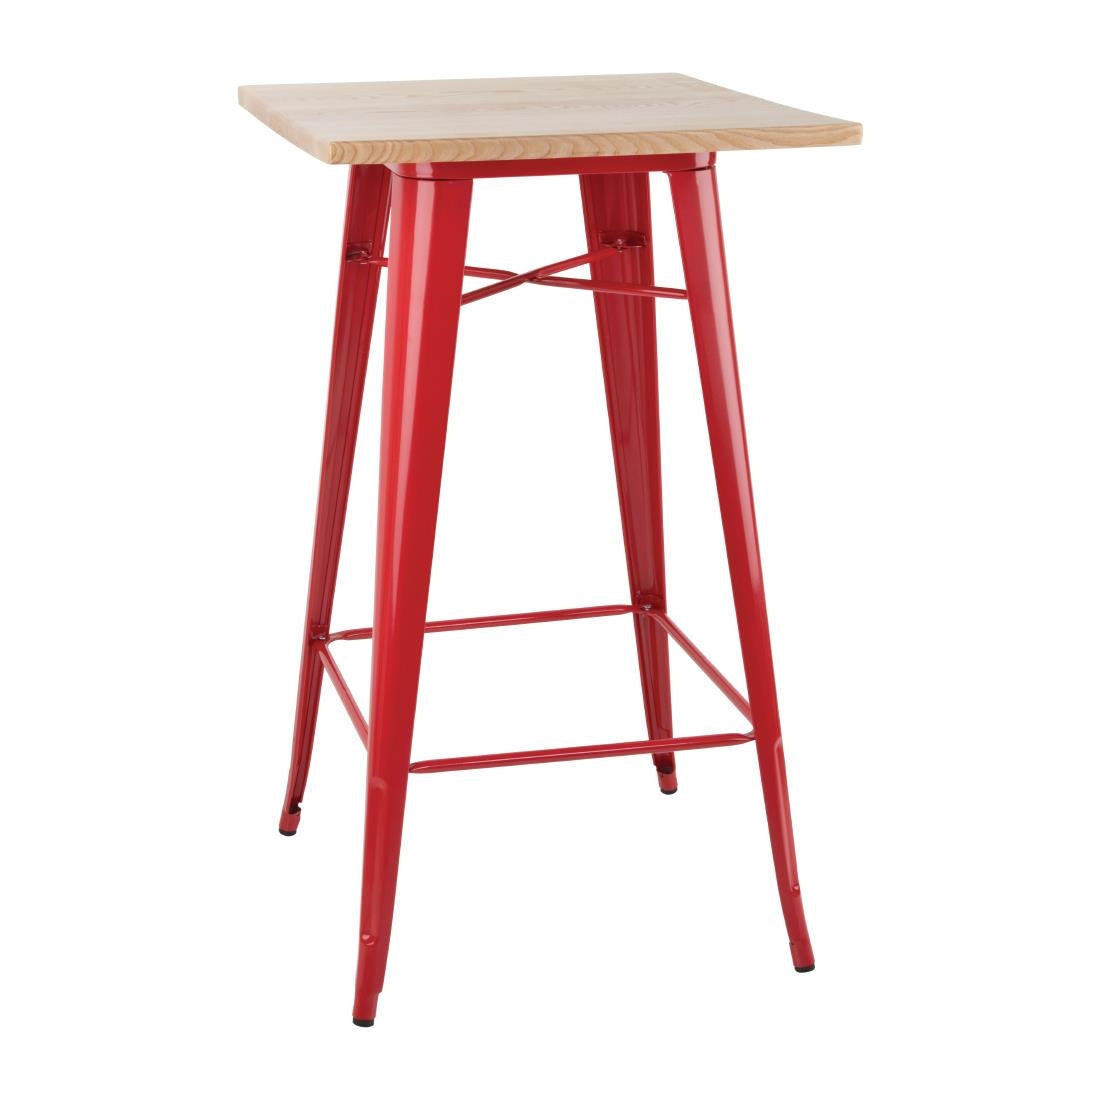 FB598 Bolero Bistro Bar Table with Wooden Top Red (Single) JD Catering Equipment Solutions Ltd